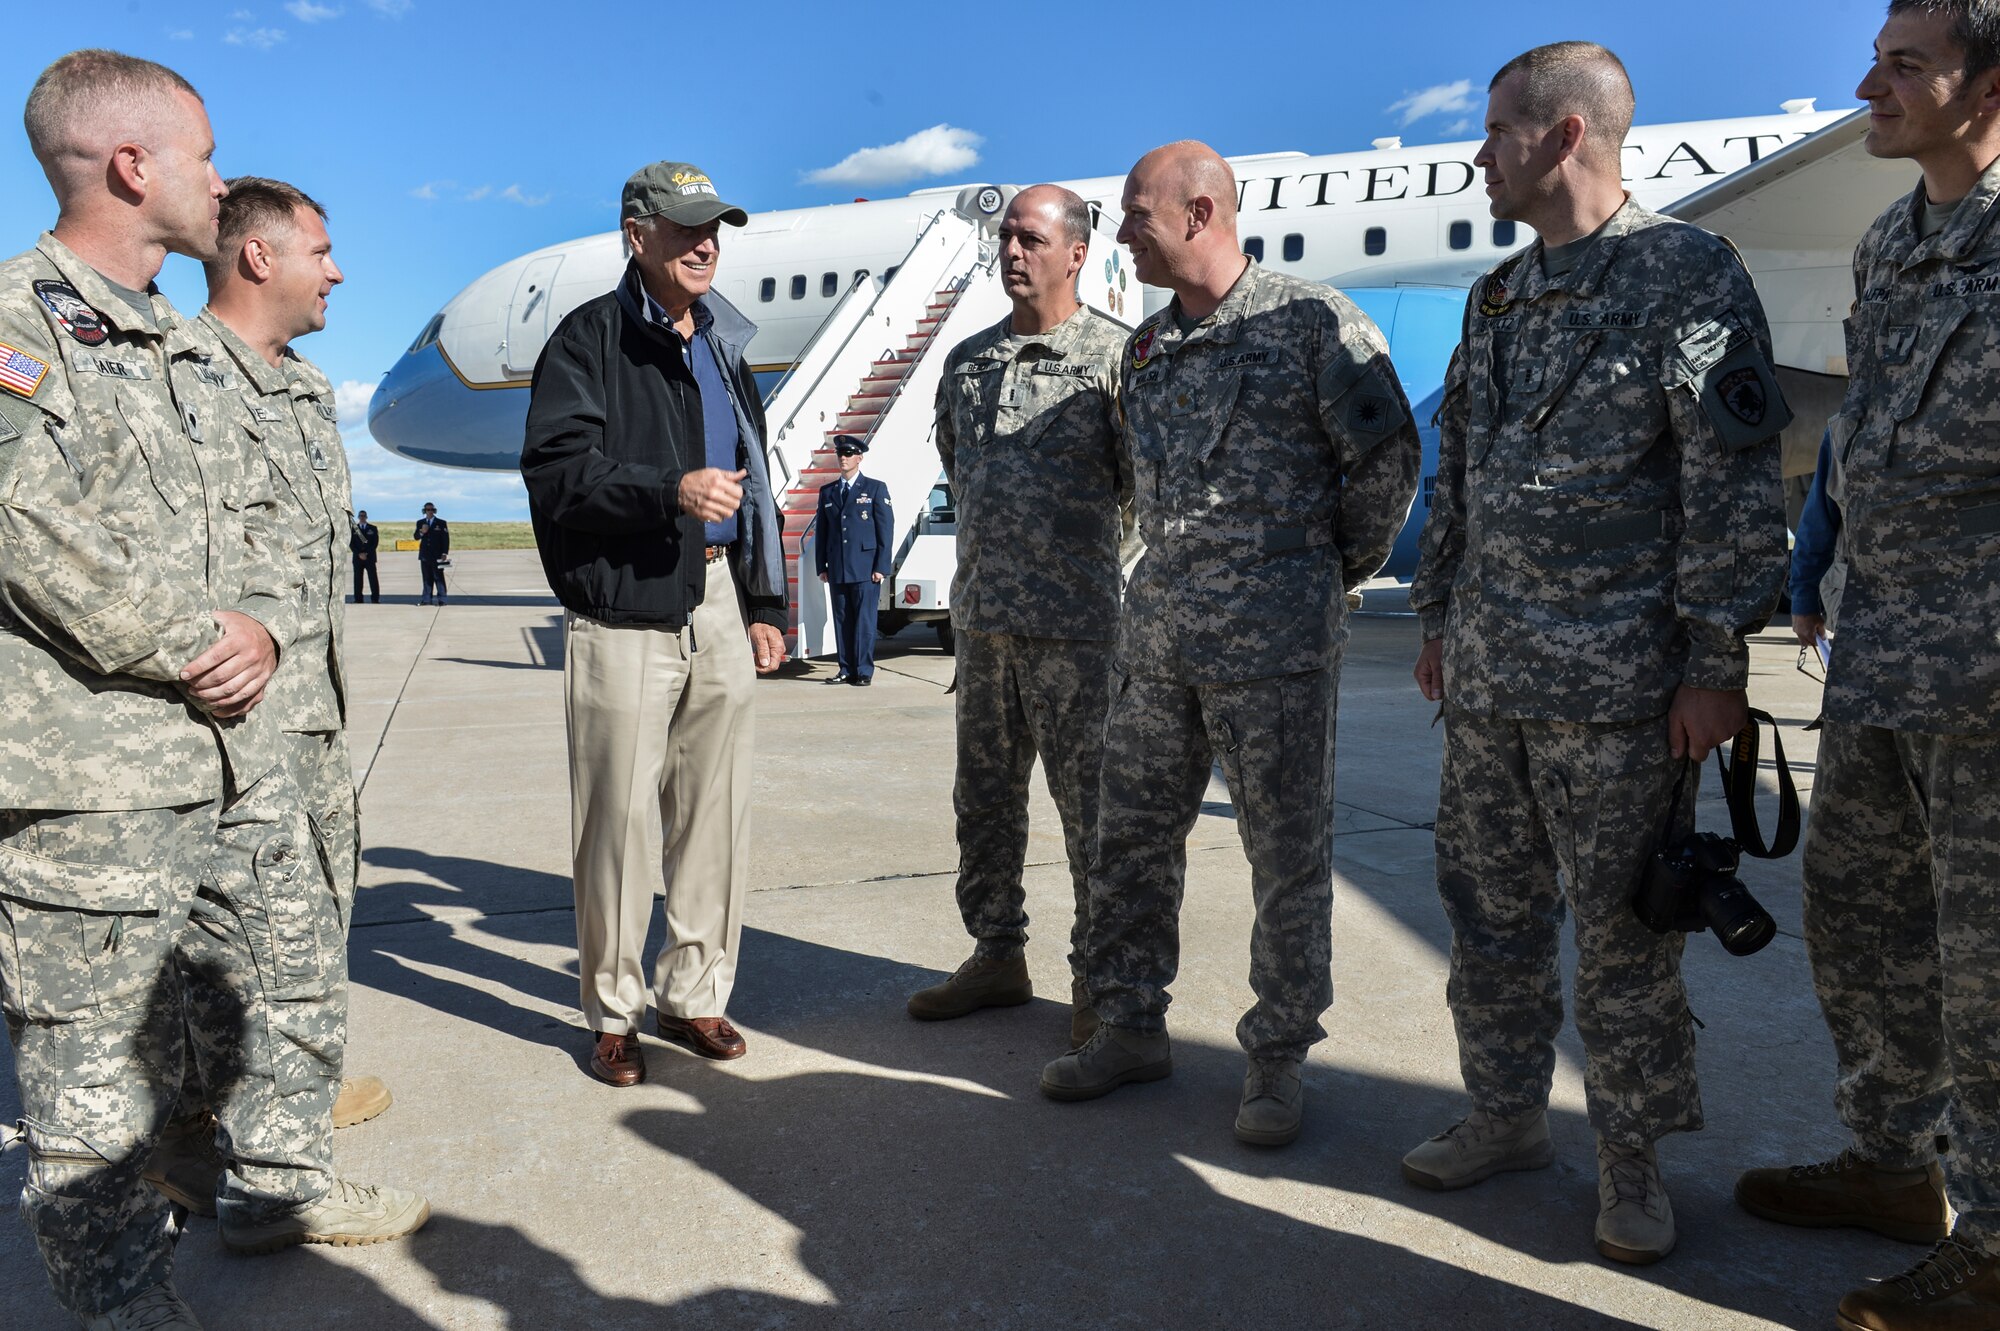 Vice President Joe Biden speaks with Colorado Army National Guard Aviation Support Facility members Sept. 23, 2013, at Buckley Air Force Base, Colo. Biden visited Colorado to view the damage and survey recovery efforts after the flooding that killed at least eight people and ravaged at least 14 counties. (U.S. Air Force photo by Airman 1st Class Riley Johnson/Released)